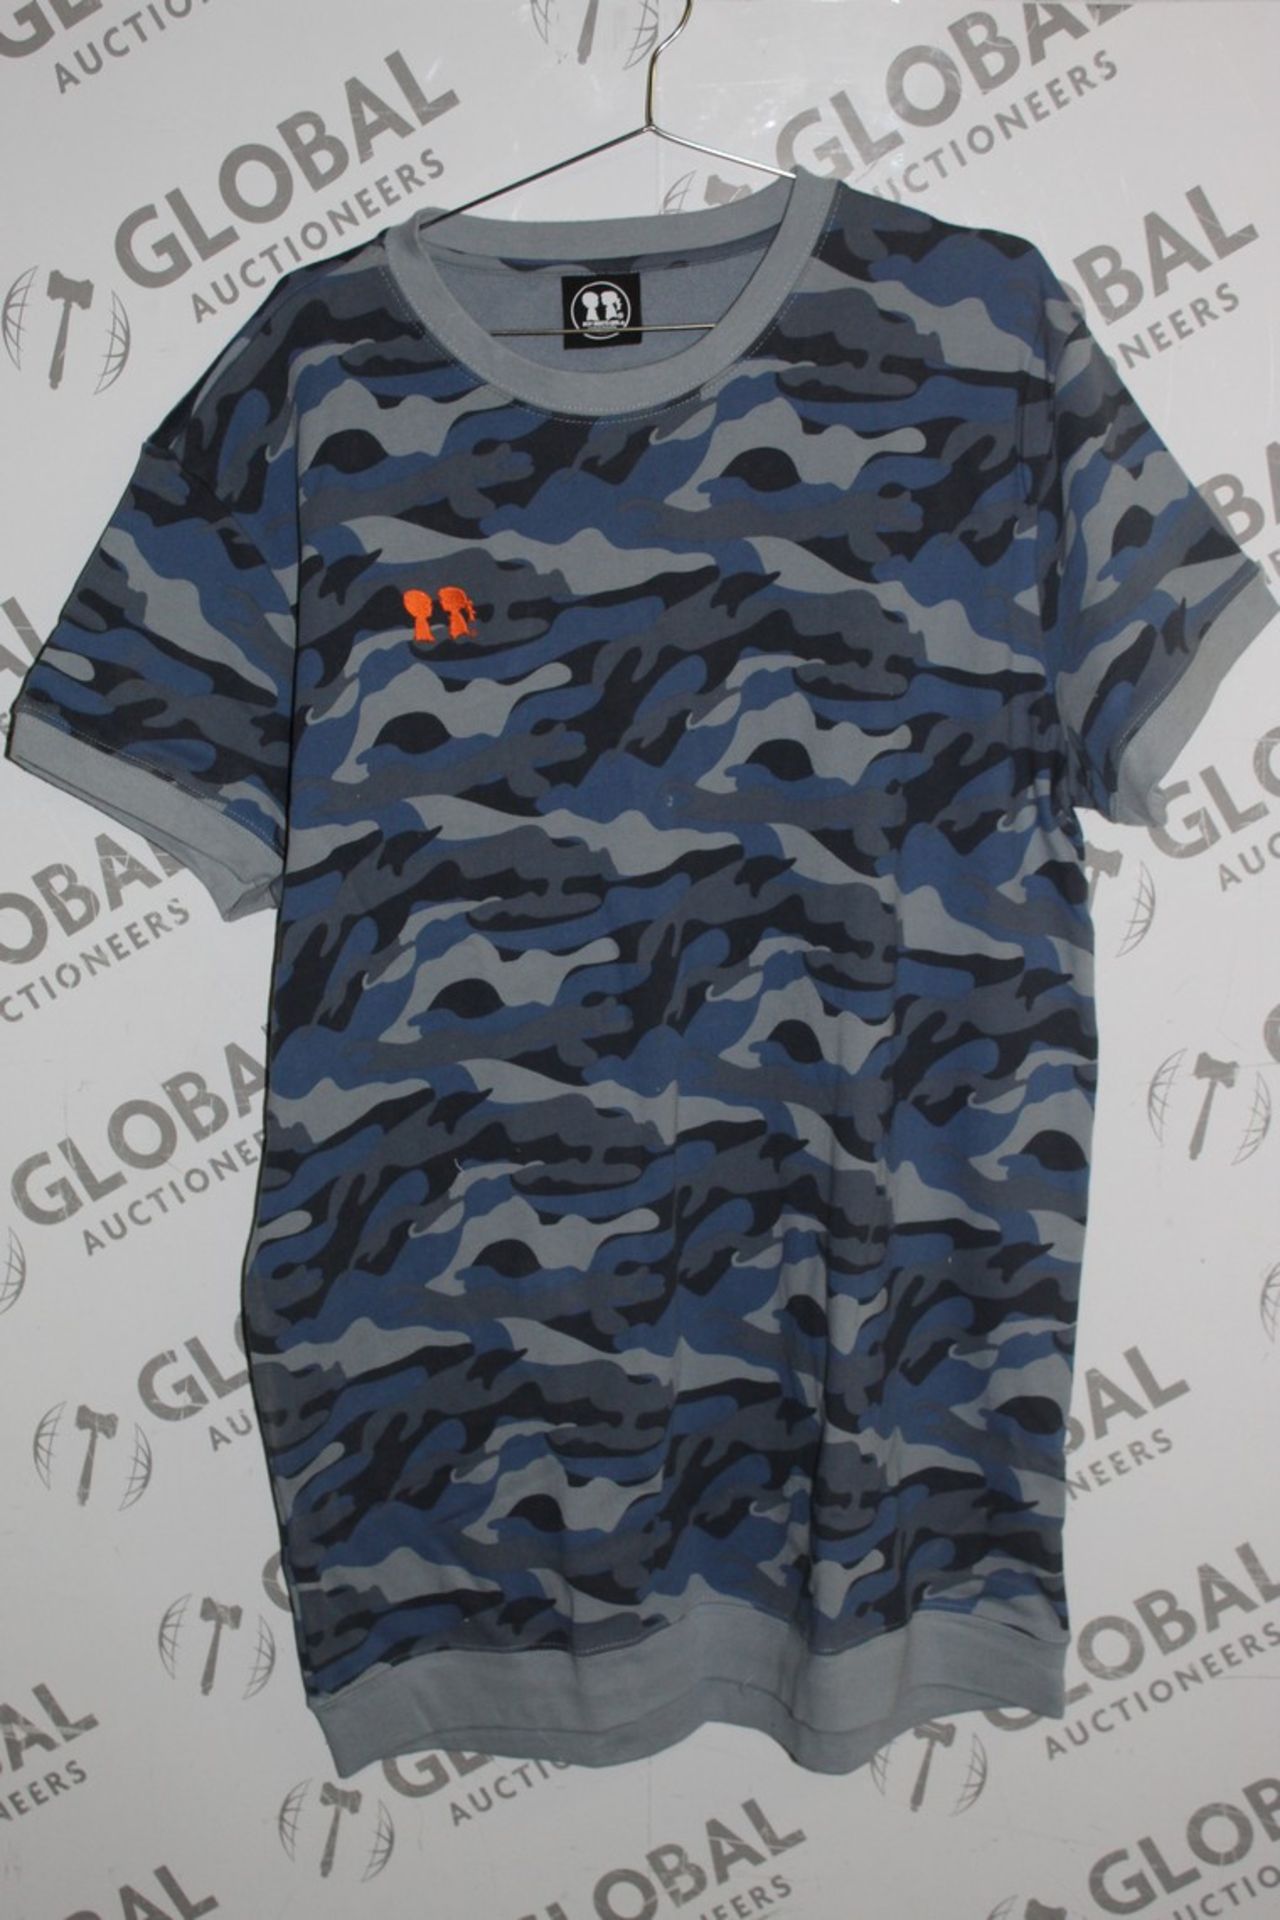 Box to Contain 24 Brand New Assorted Size Boy Meets Girl C&C Camo and Blue and Grey Over Sized T-